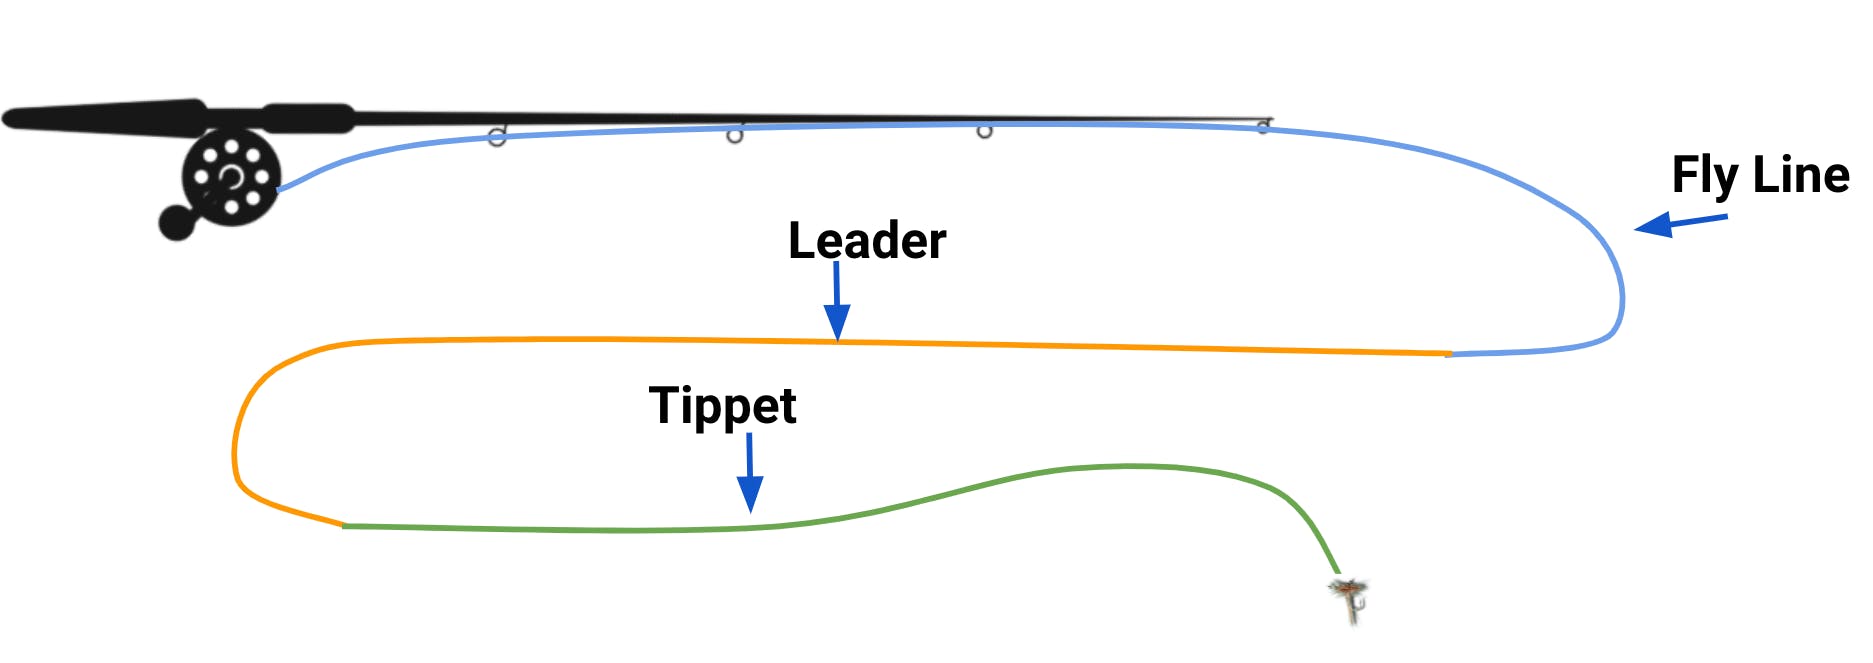 Diagram of a fly road indicating where the leader, tippet, and fly line are.